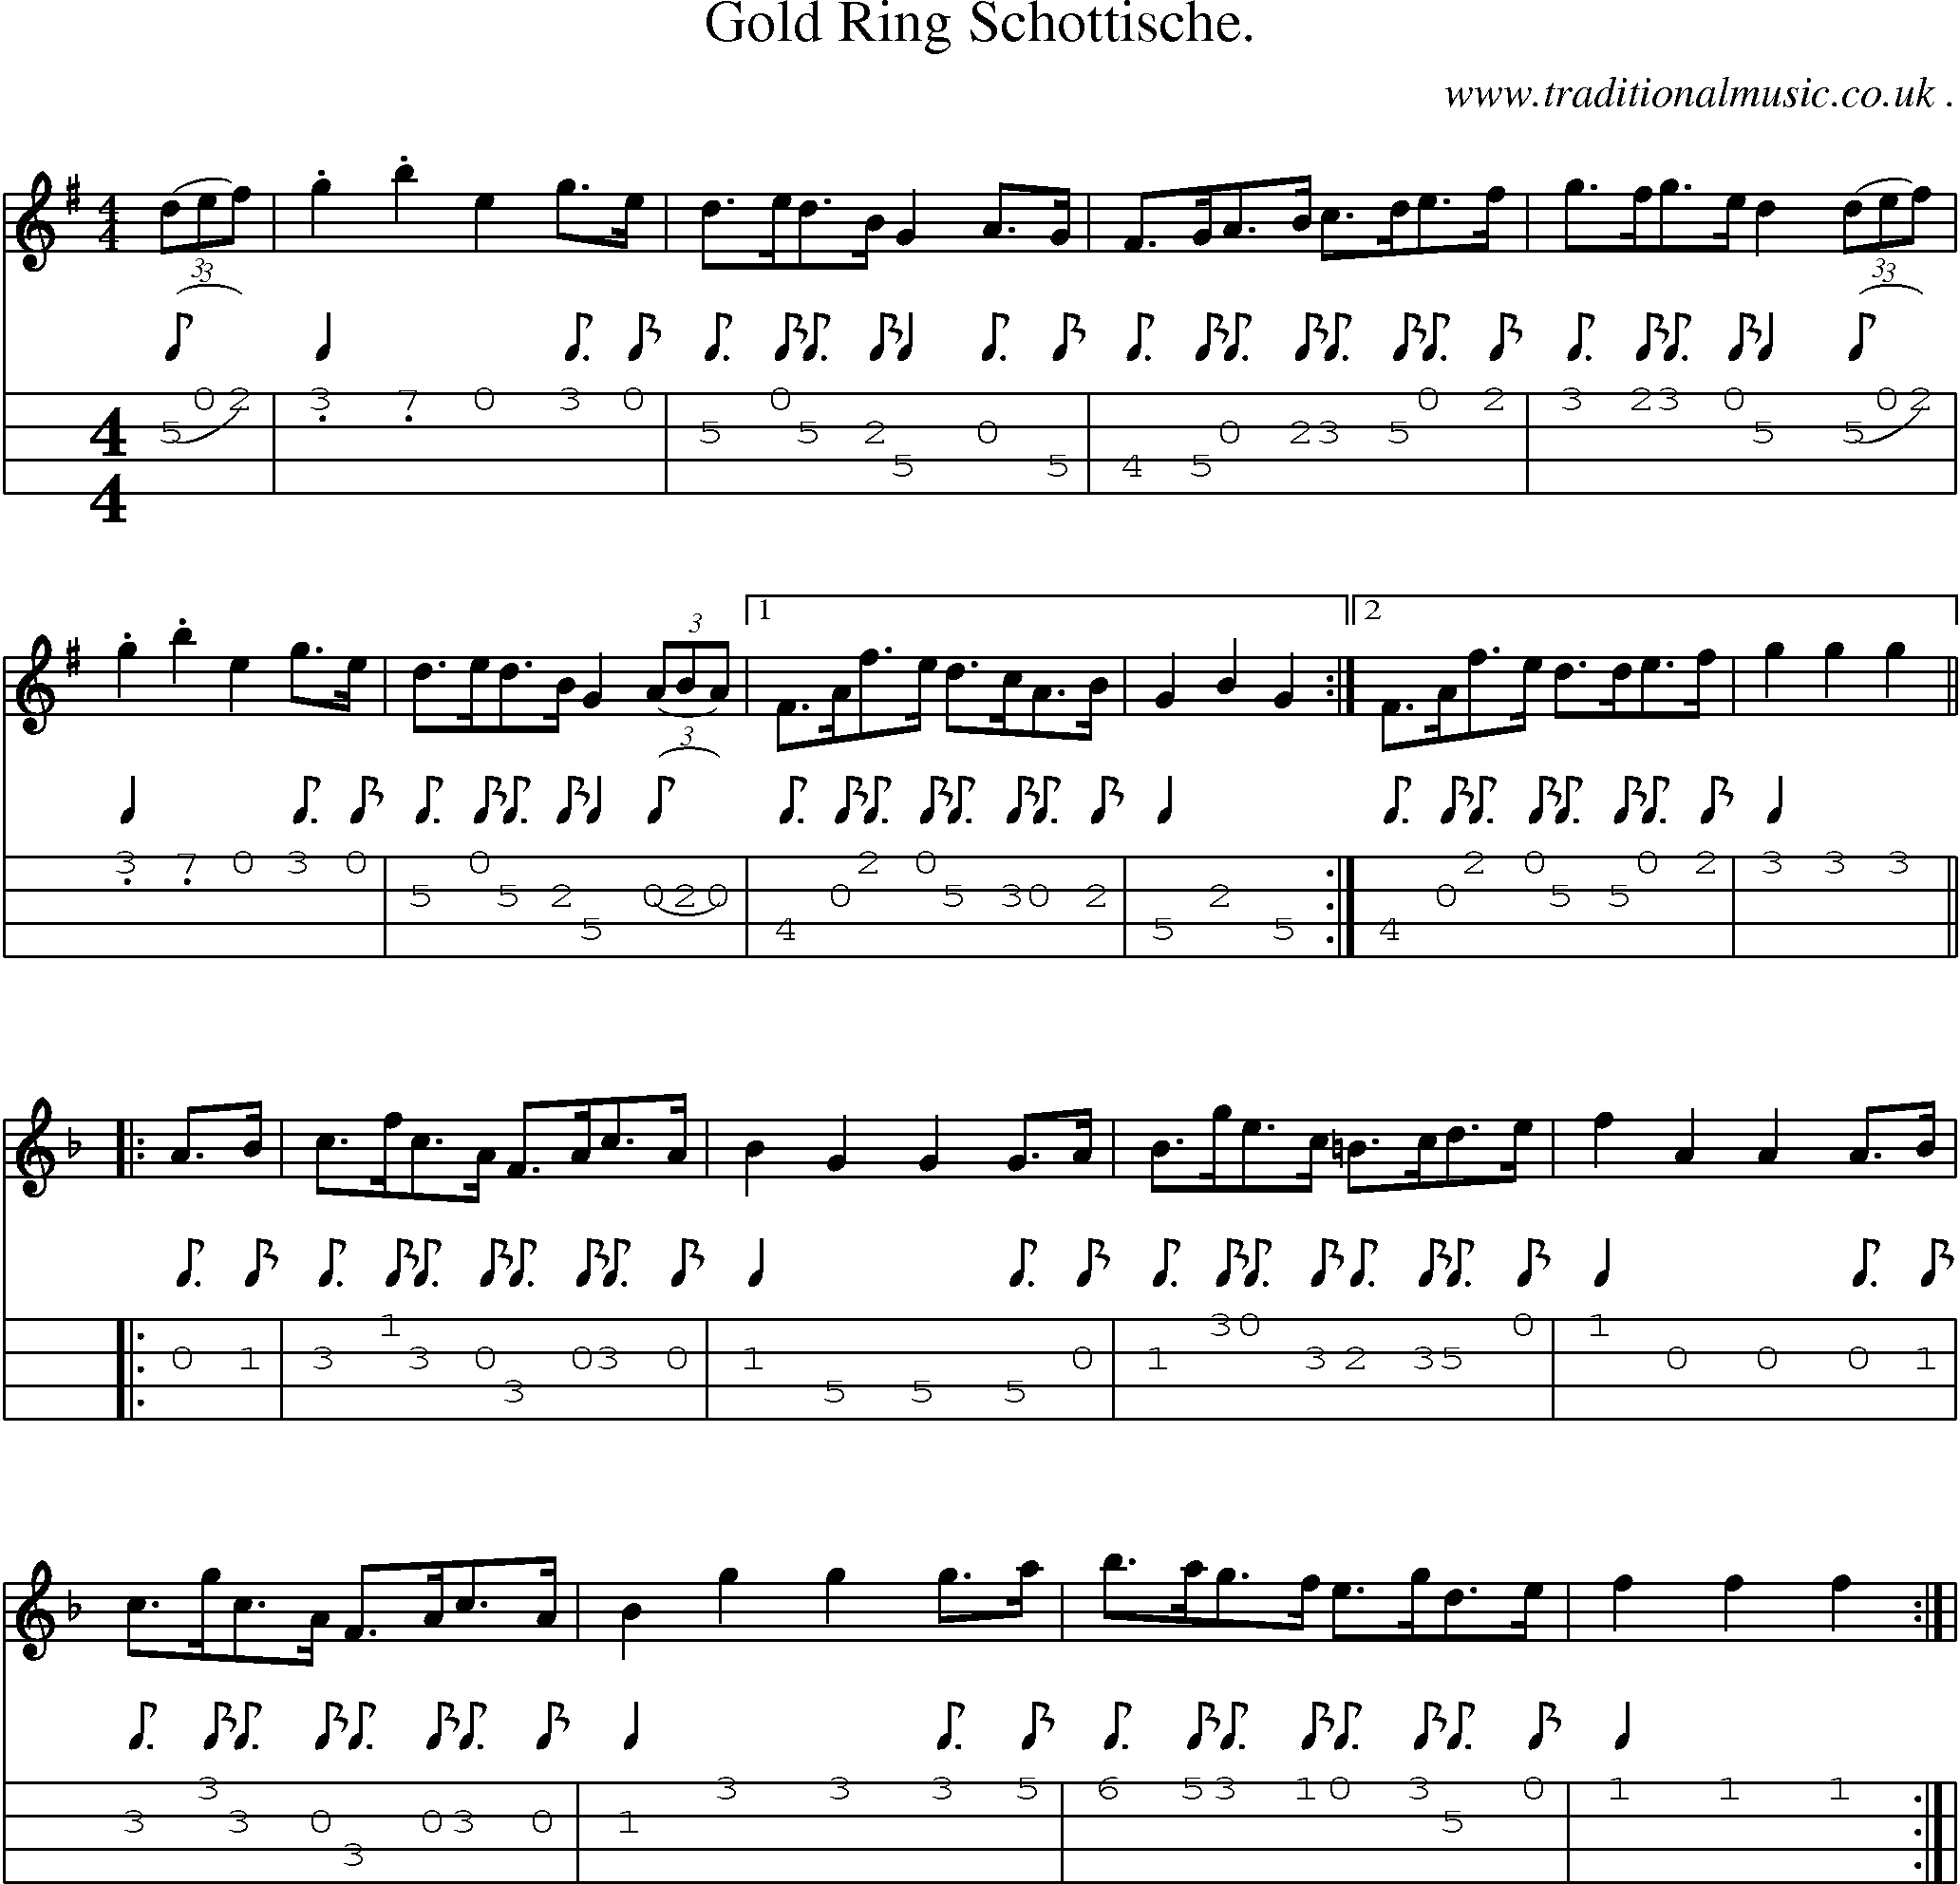 Sheet-Music and Mandolin Tabs for Gold Ring Schottische